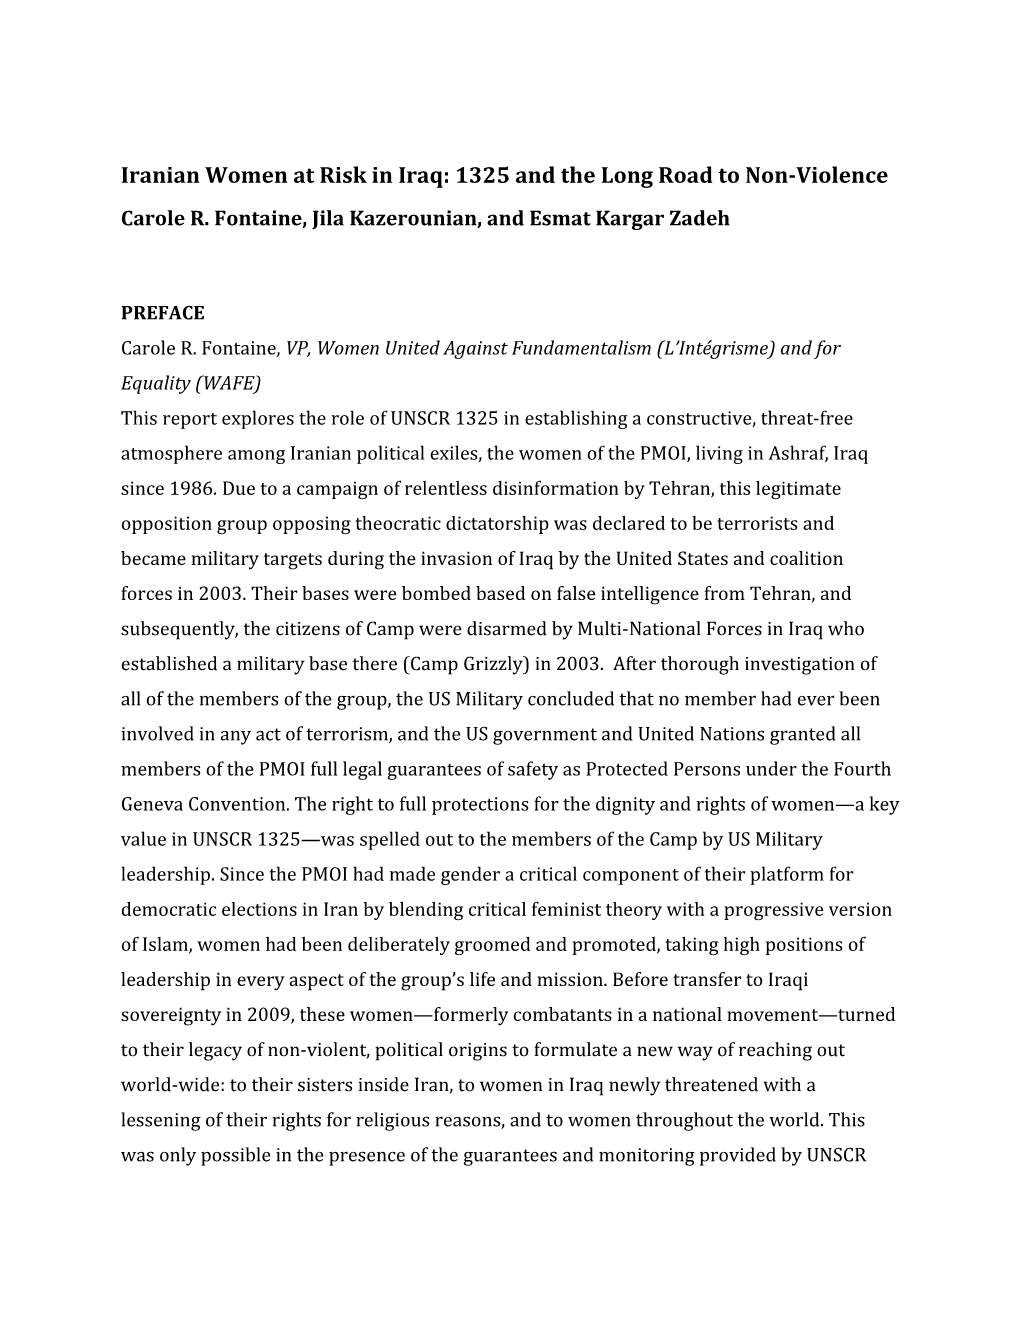 Iranian Women at Risk in Iraq: 1325 and the Long Road to Non-Violence